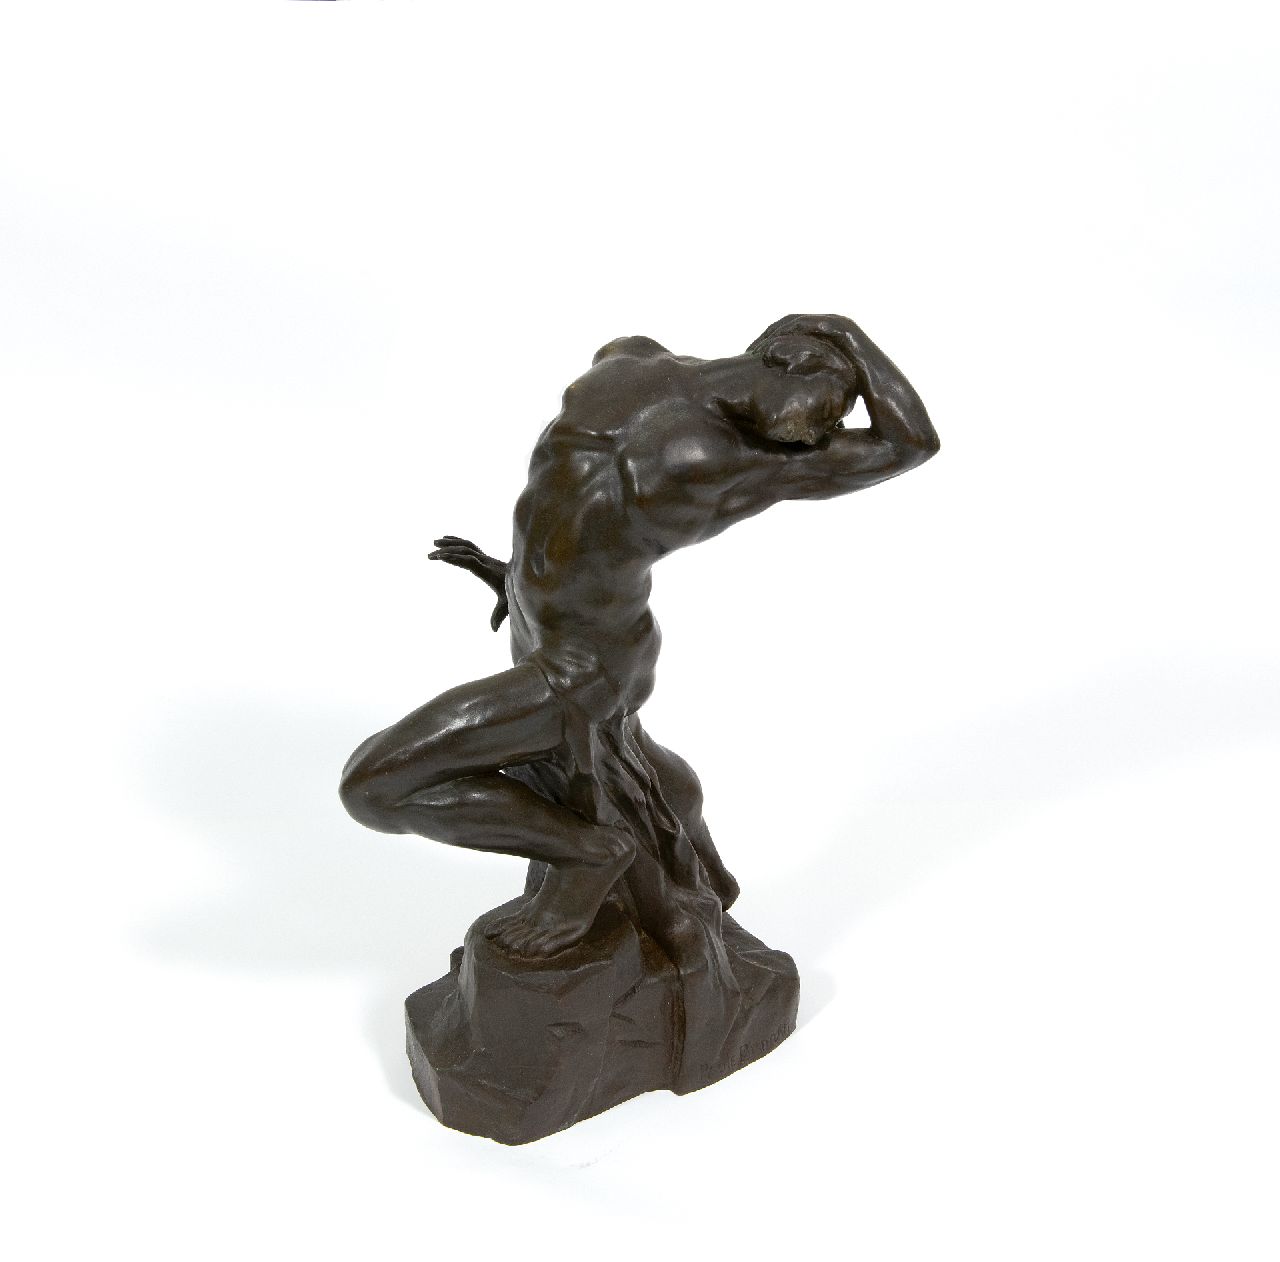 Bisman P.  | Paule Bisman | Sculptures and objects offered for sale | Exalted, bronze 38.5 cm, signed on the base